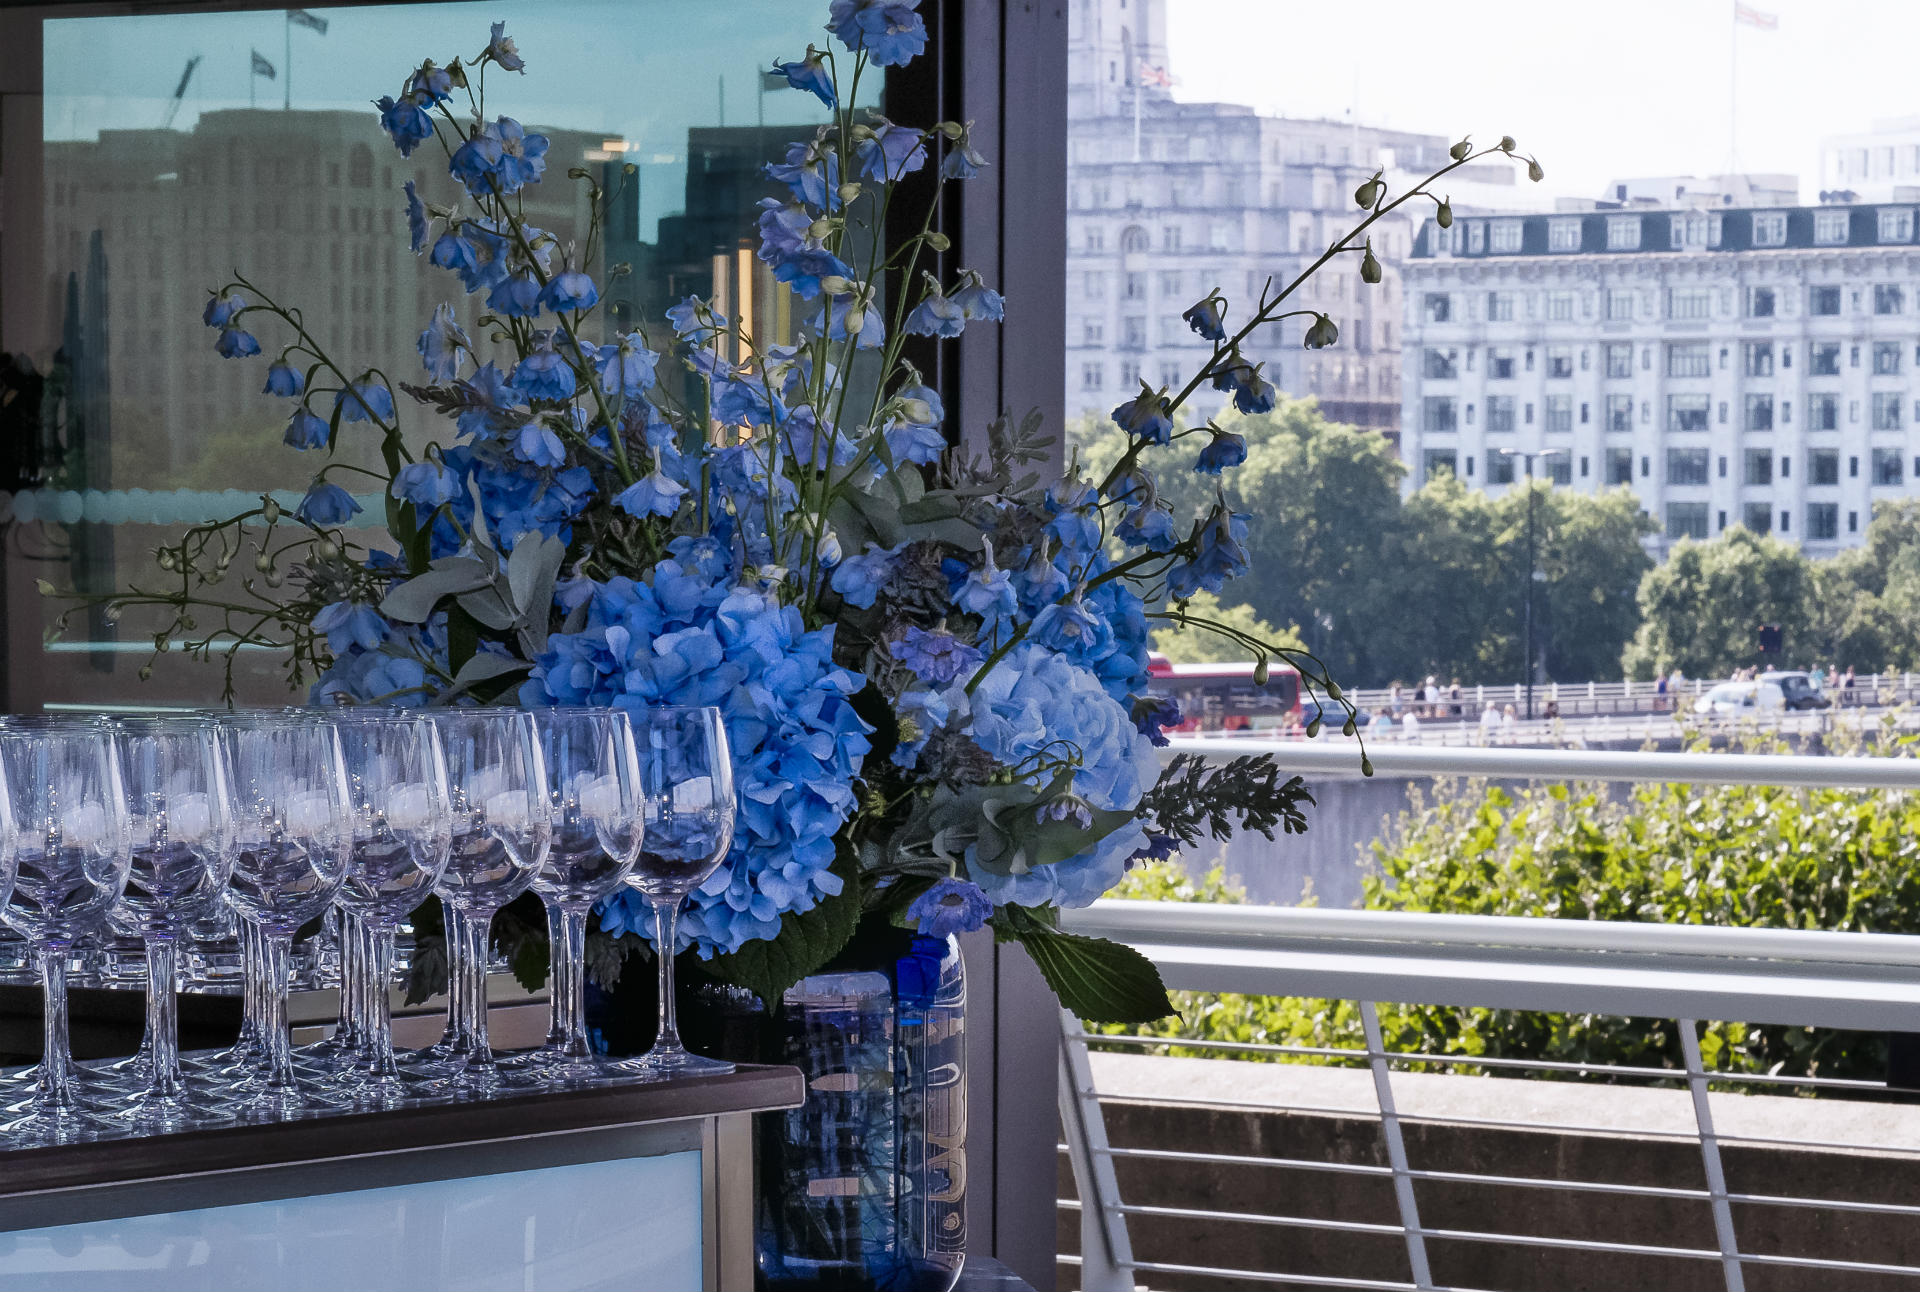 The Buffini Chao Deck event hire space view from interior with flowers towards the north bank of the Thames